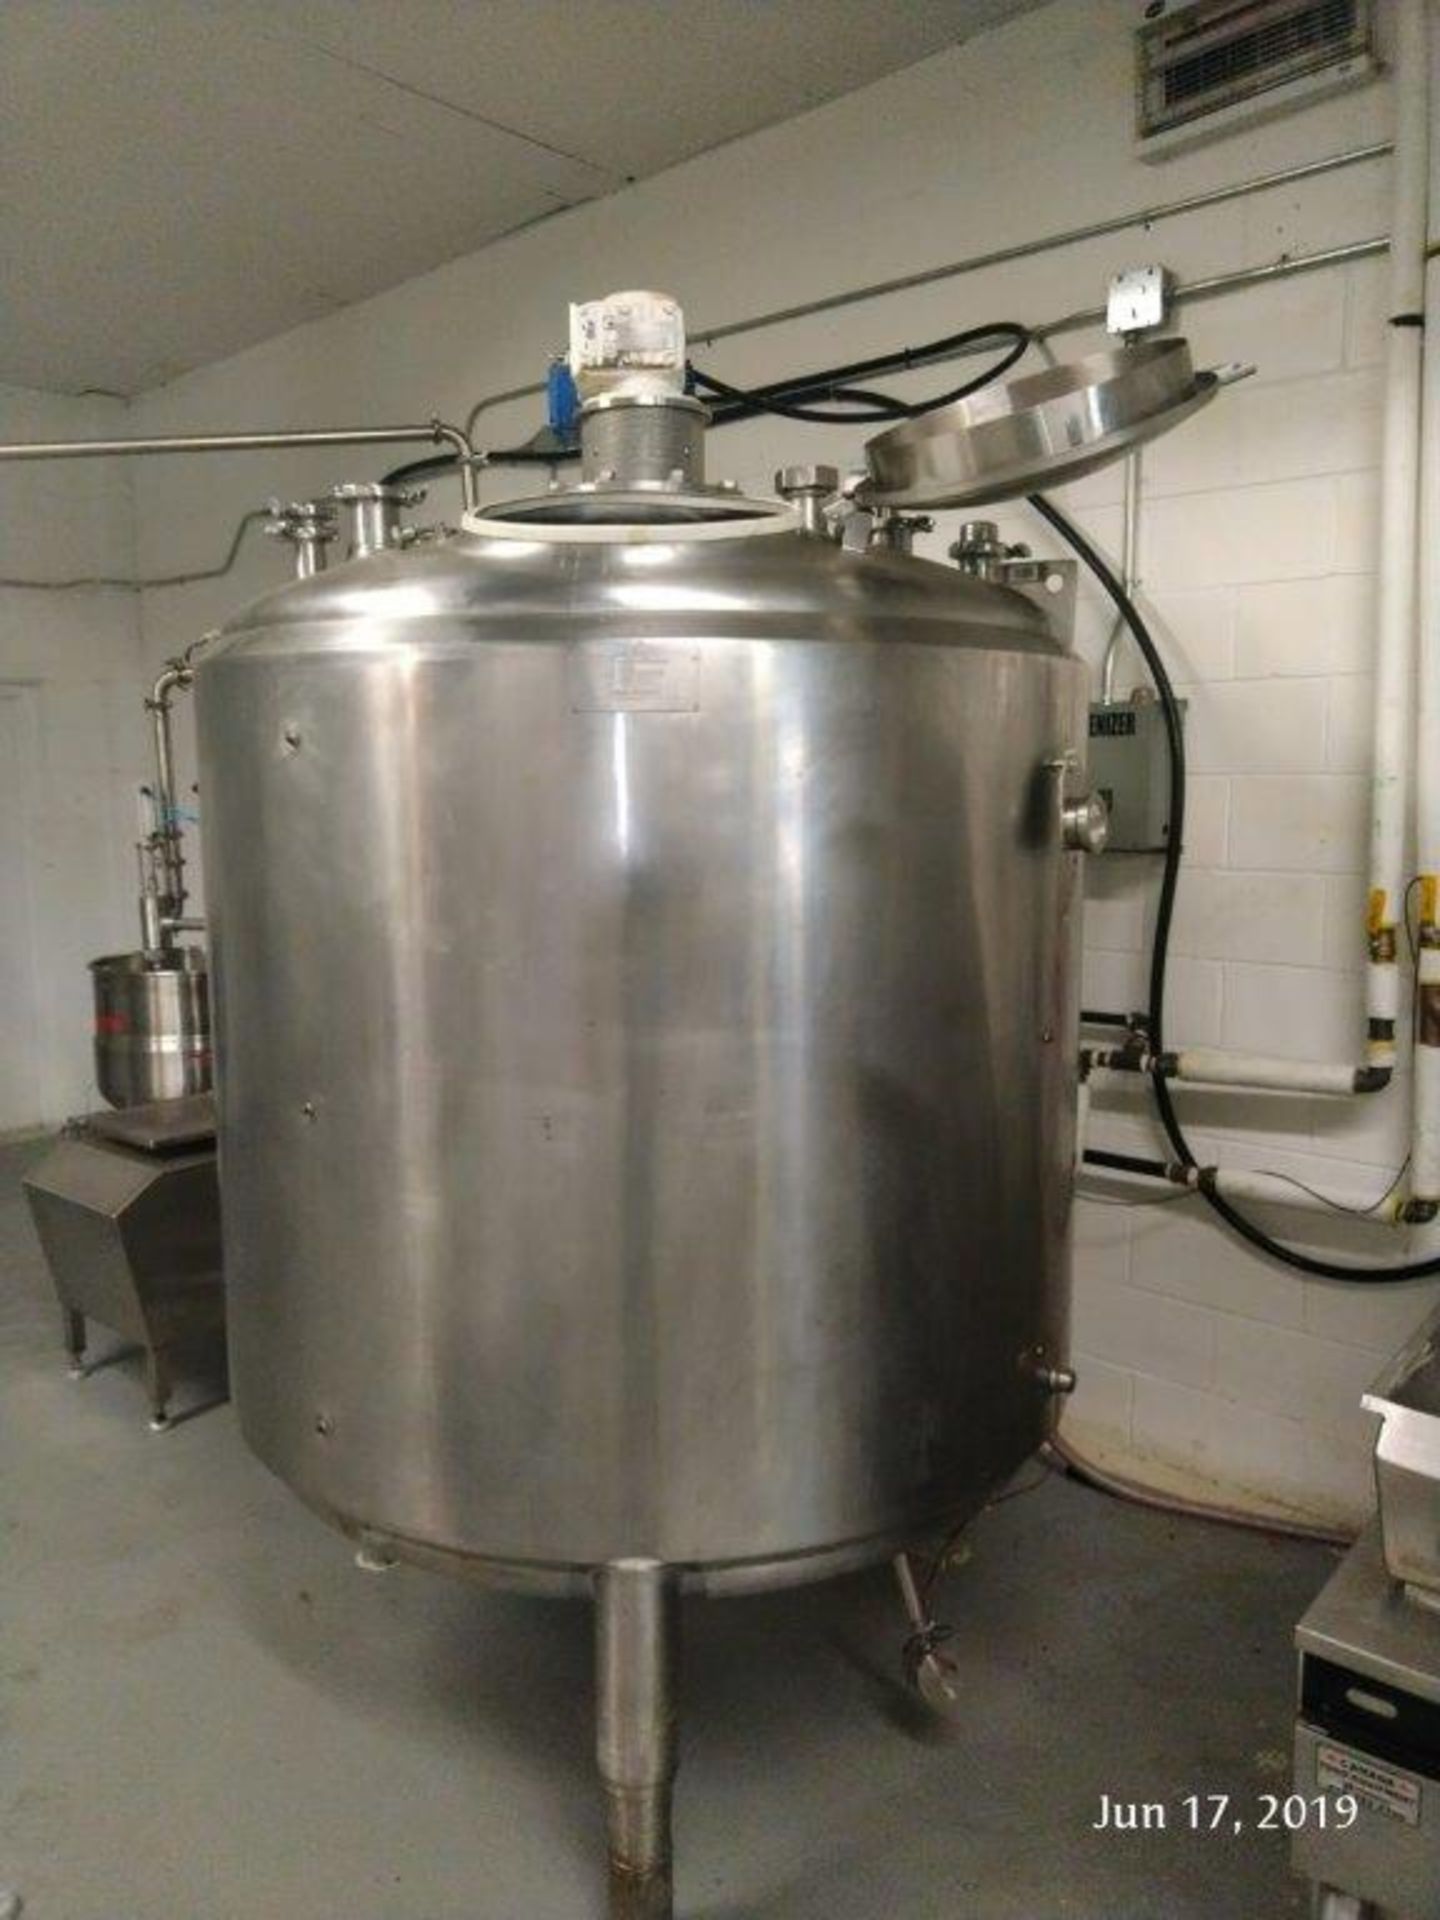 700 G CHERRY BURRELL SS JACKETED TANK WITH TOP MOUNTED MIXER. - LOCATION - AURORA, ONTARIO